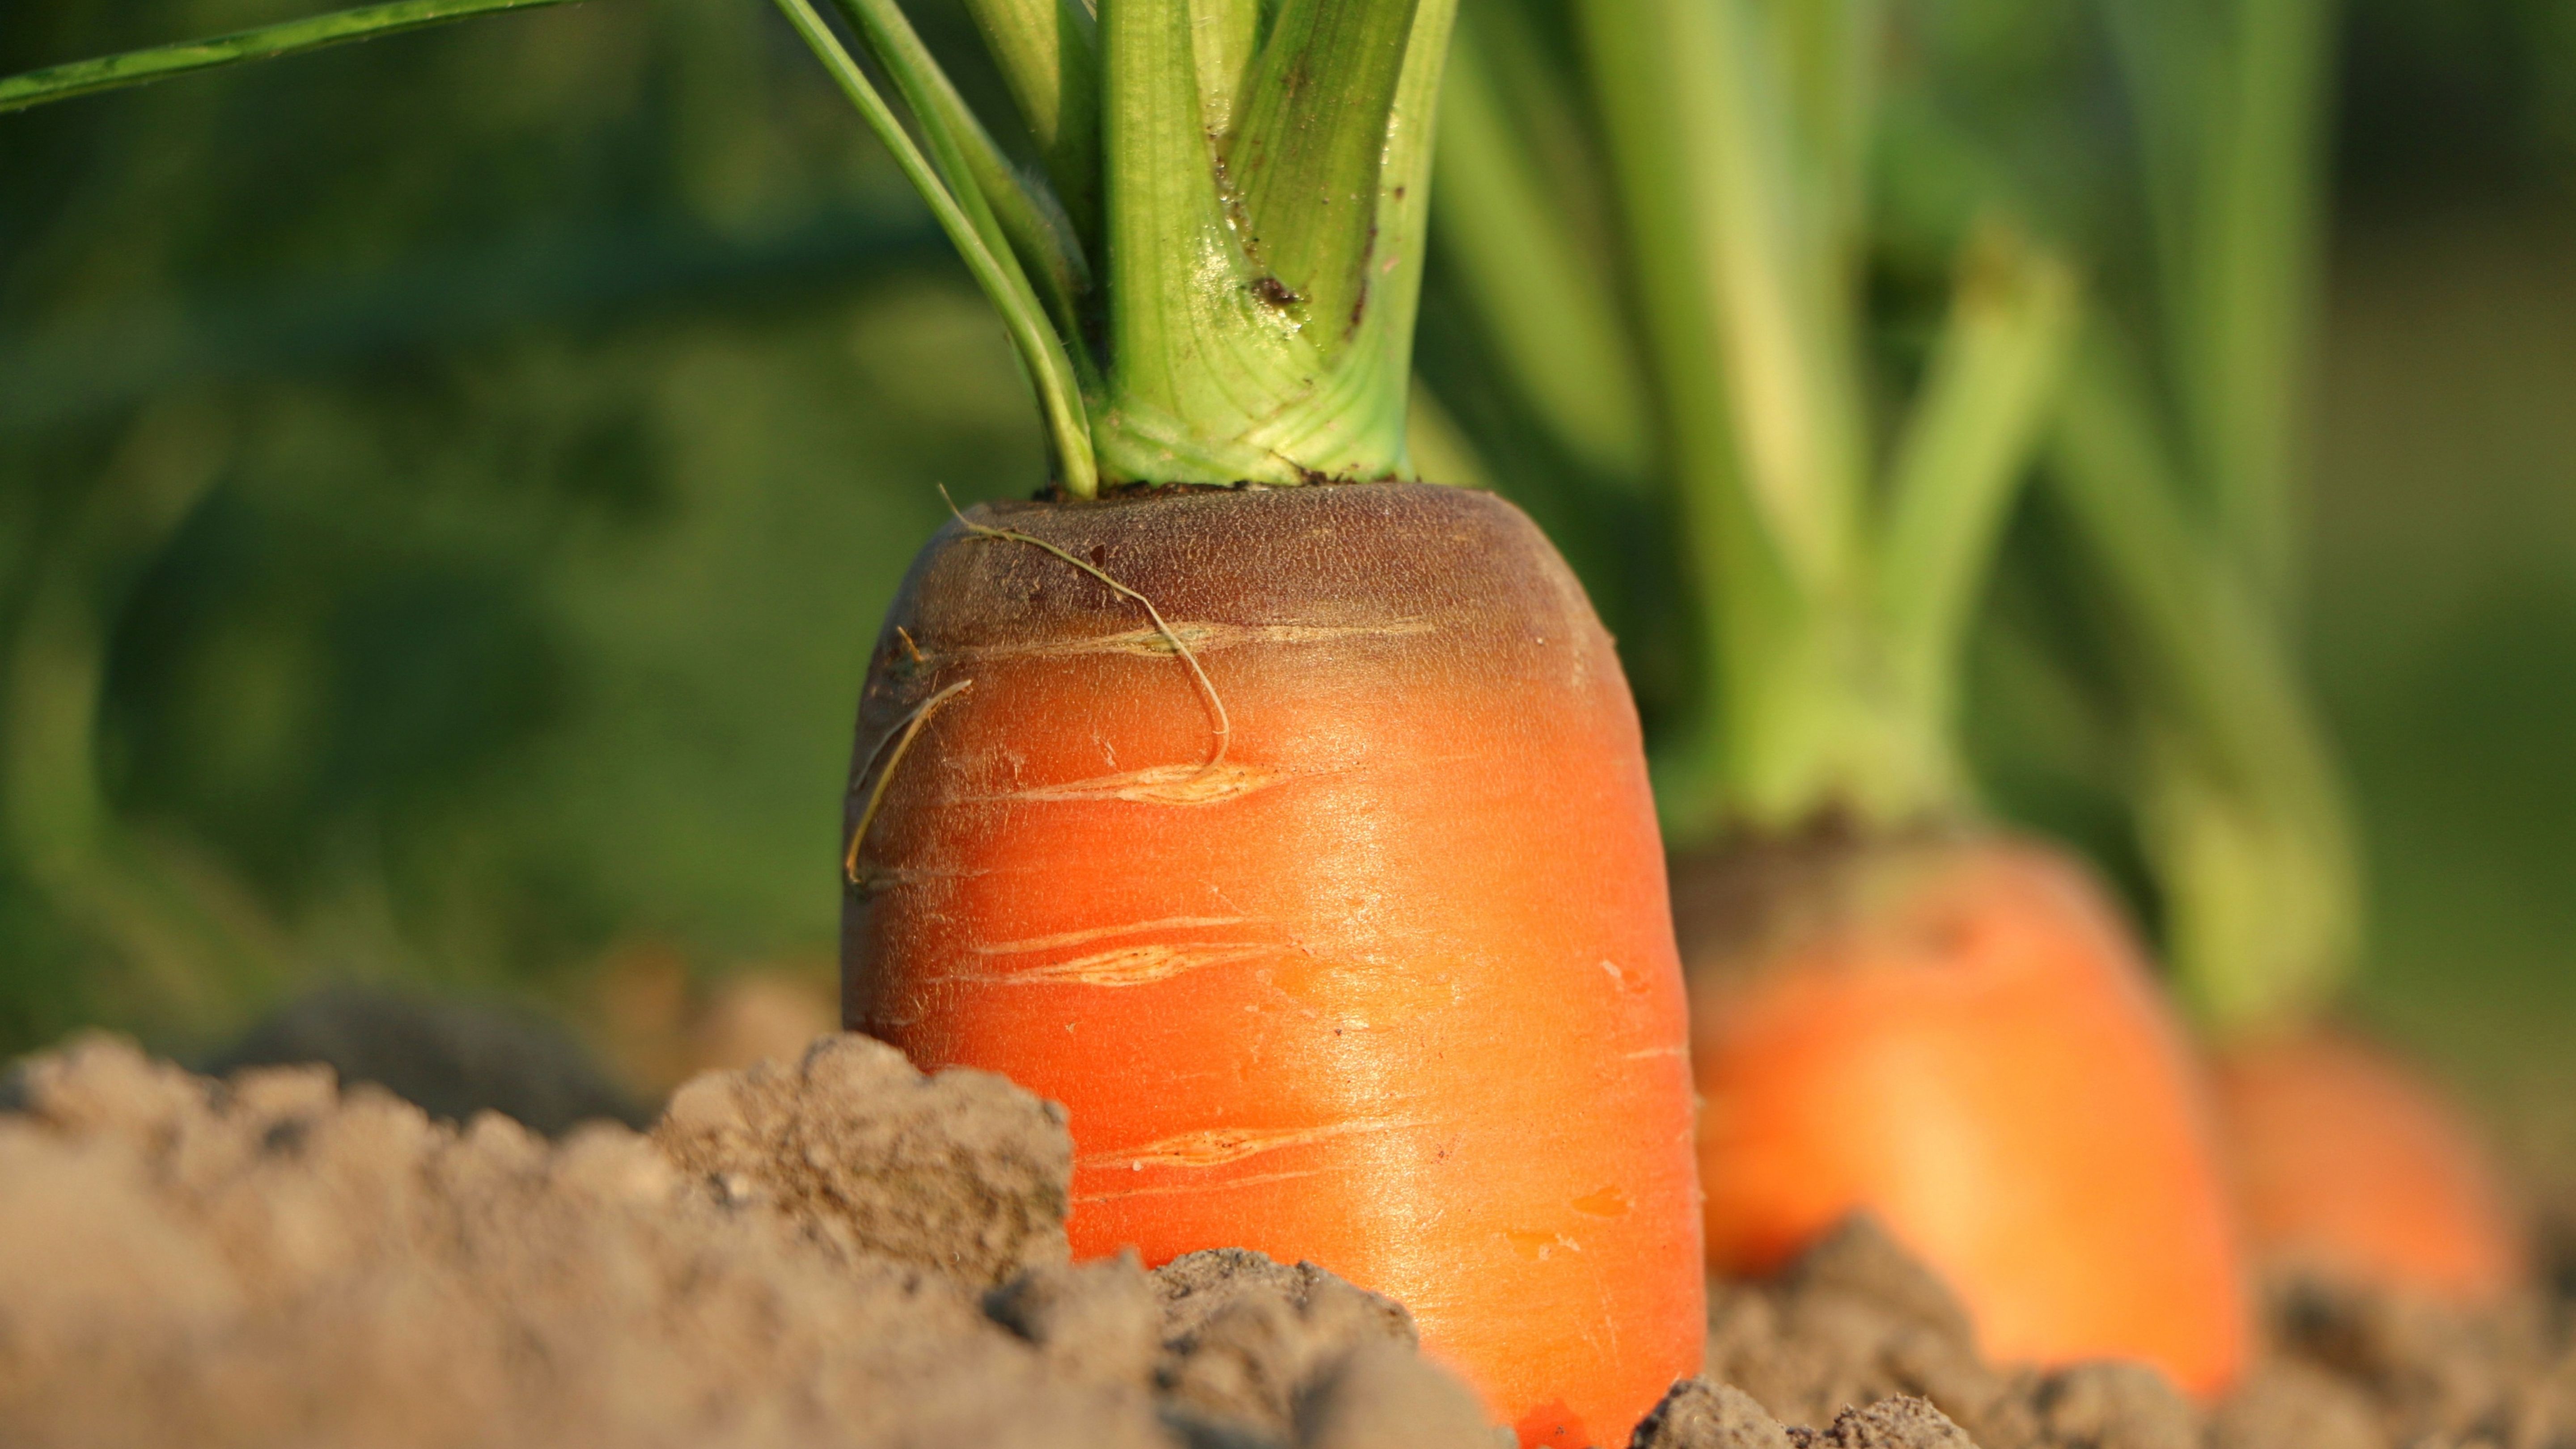 Overview of Carrots